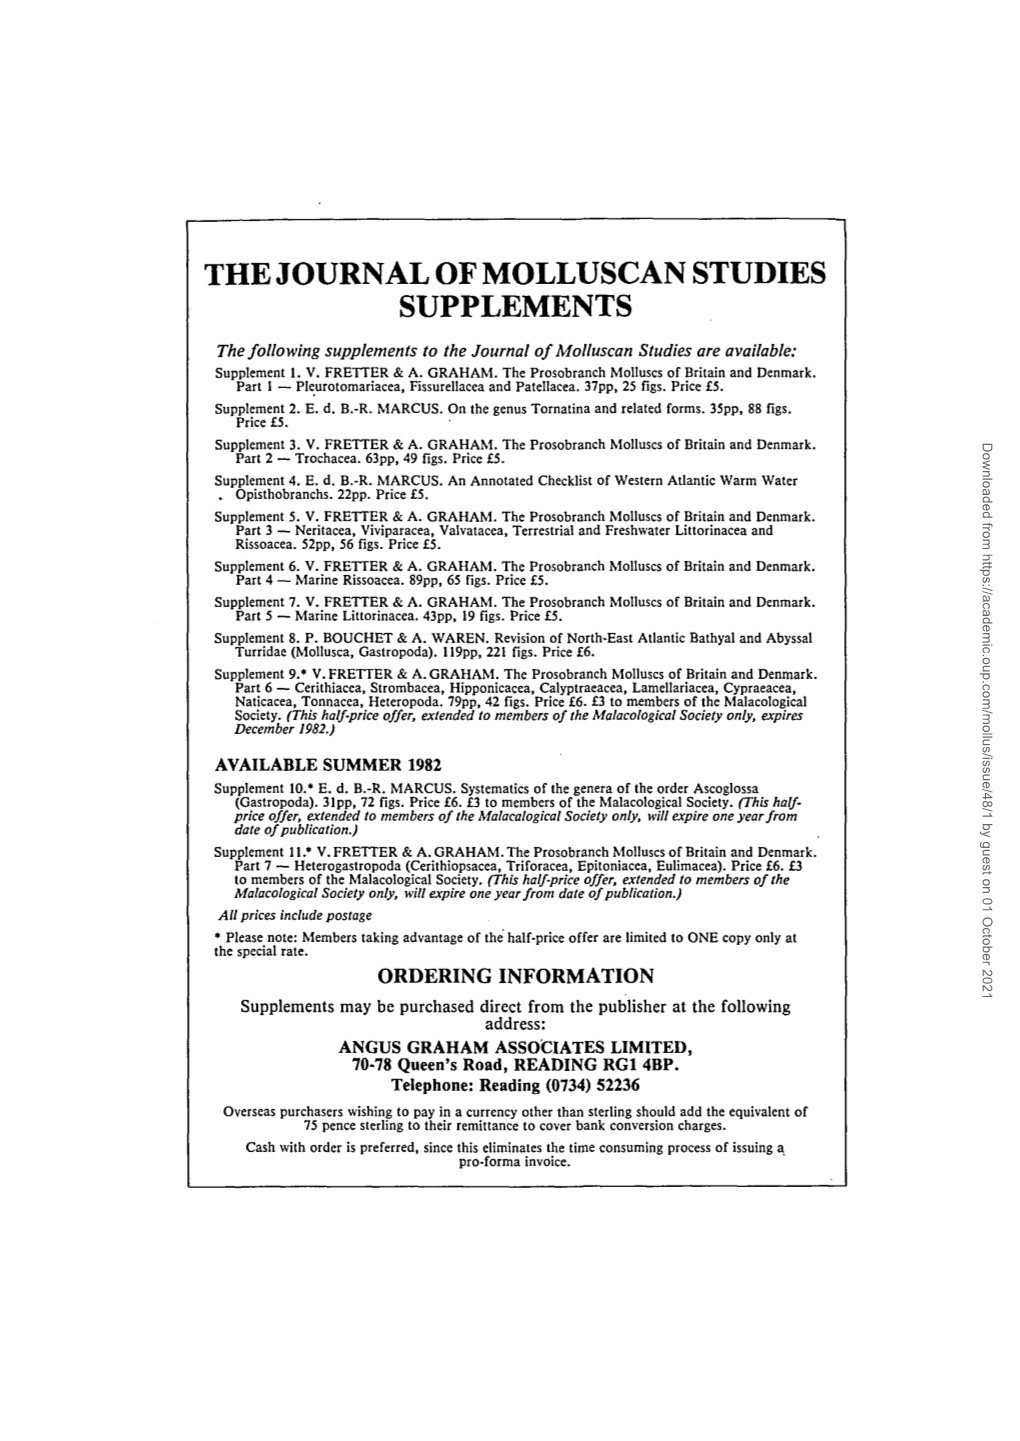 THE JOURNAL of MOLLUSCAN STUDIES SUPPLEMENTS the Following Supplements to the Journal of Molluscan Studies Are Available: Supplement 1